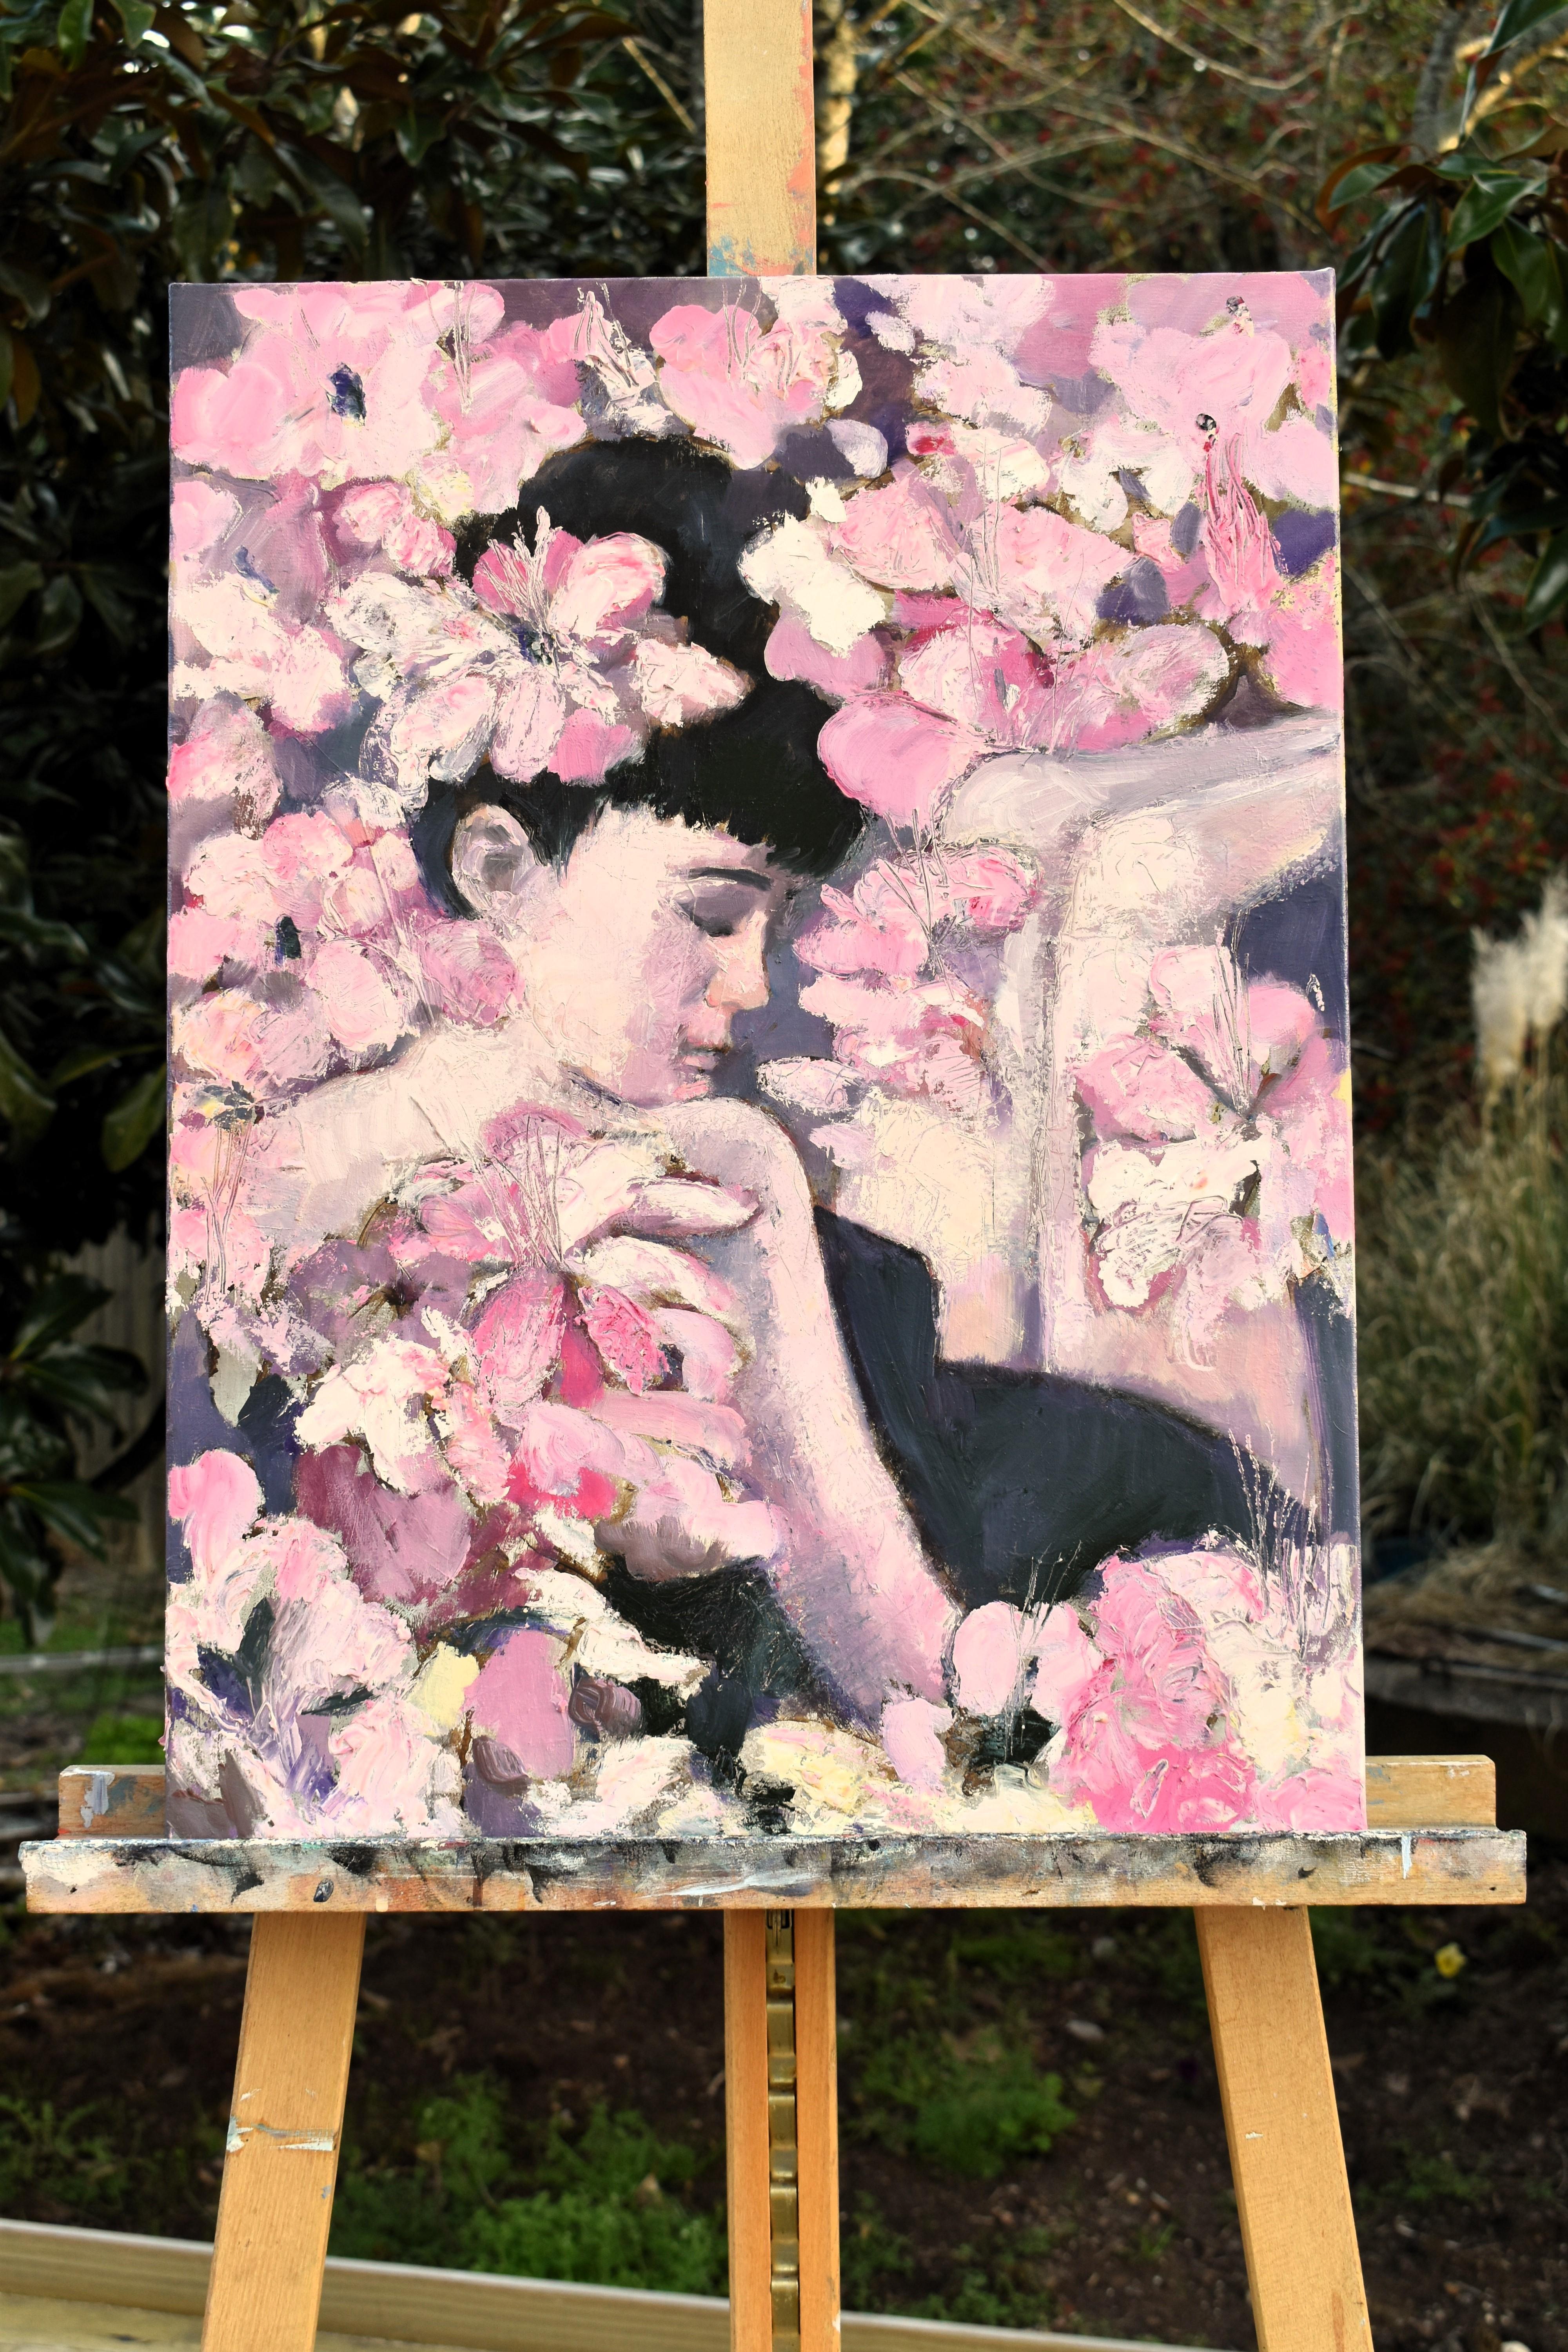 <p>Artist Comments<br>Nestled within an explosion of pink blooms, a woman becomes one with her surroundings. Soft hues form an ethereal refuge, providing a tranquil space for her repose. Painted with a palette knife, her image manifests a delicate